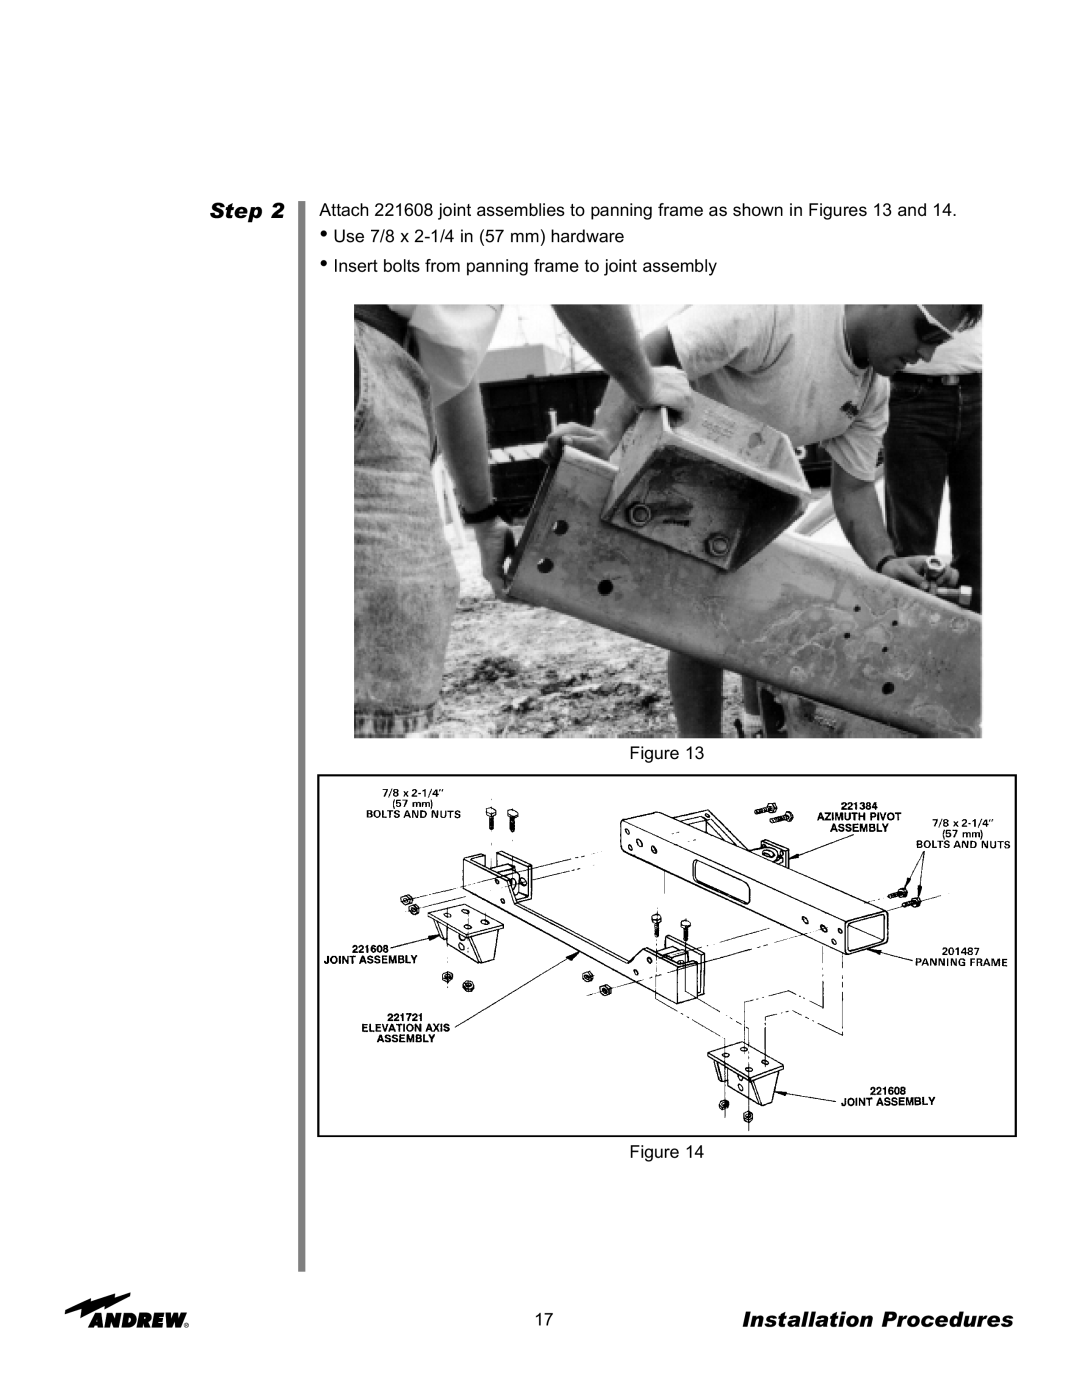 Andrew 7.6-Meter ESA manual Step, Installation Procedures, Use 7/8 x 2-1/4 in 57 mm hardware 